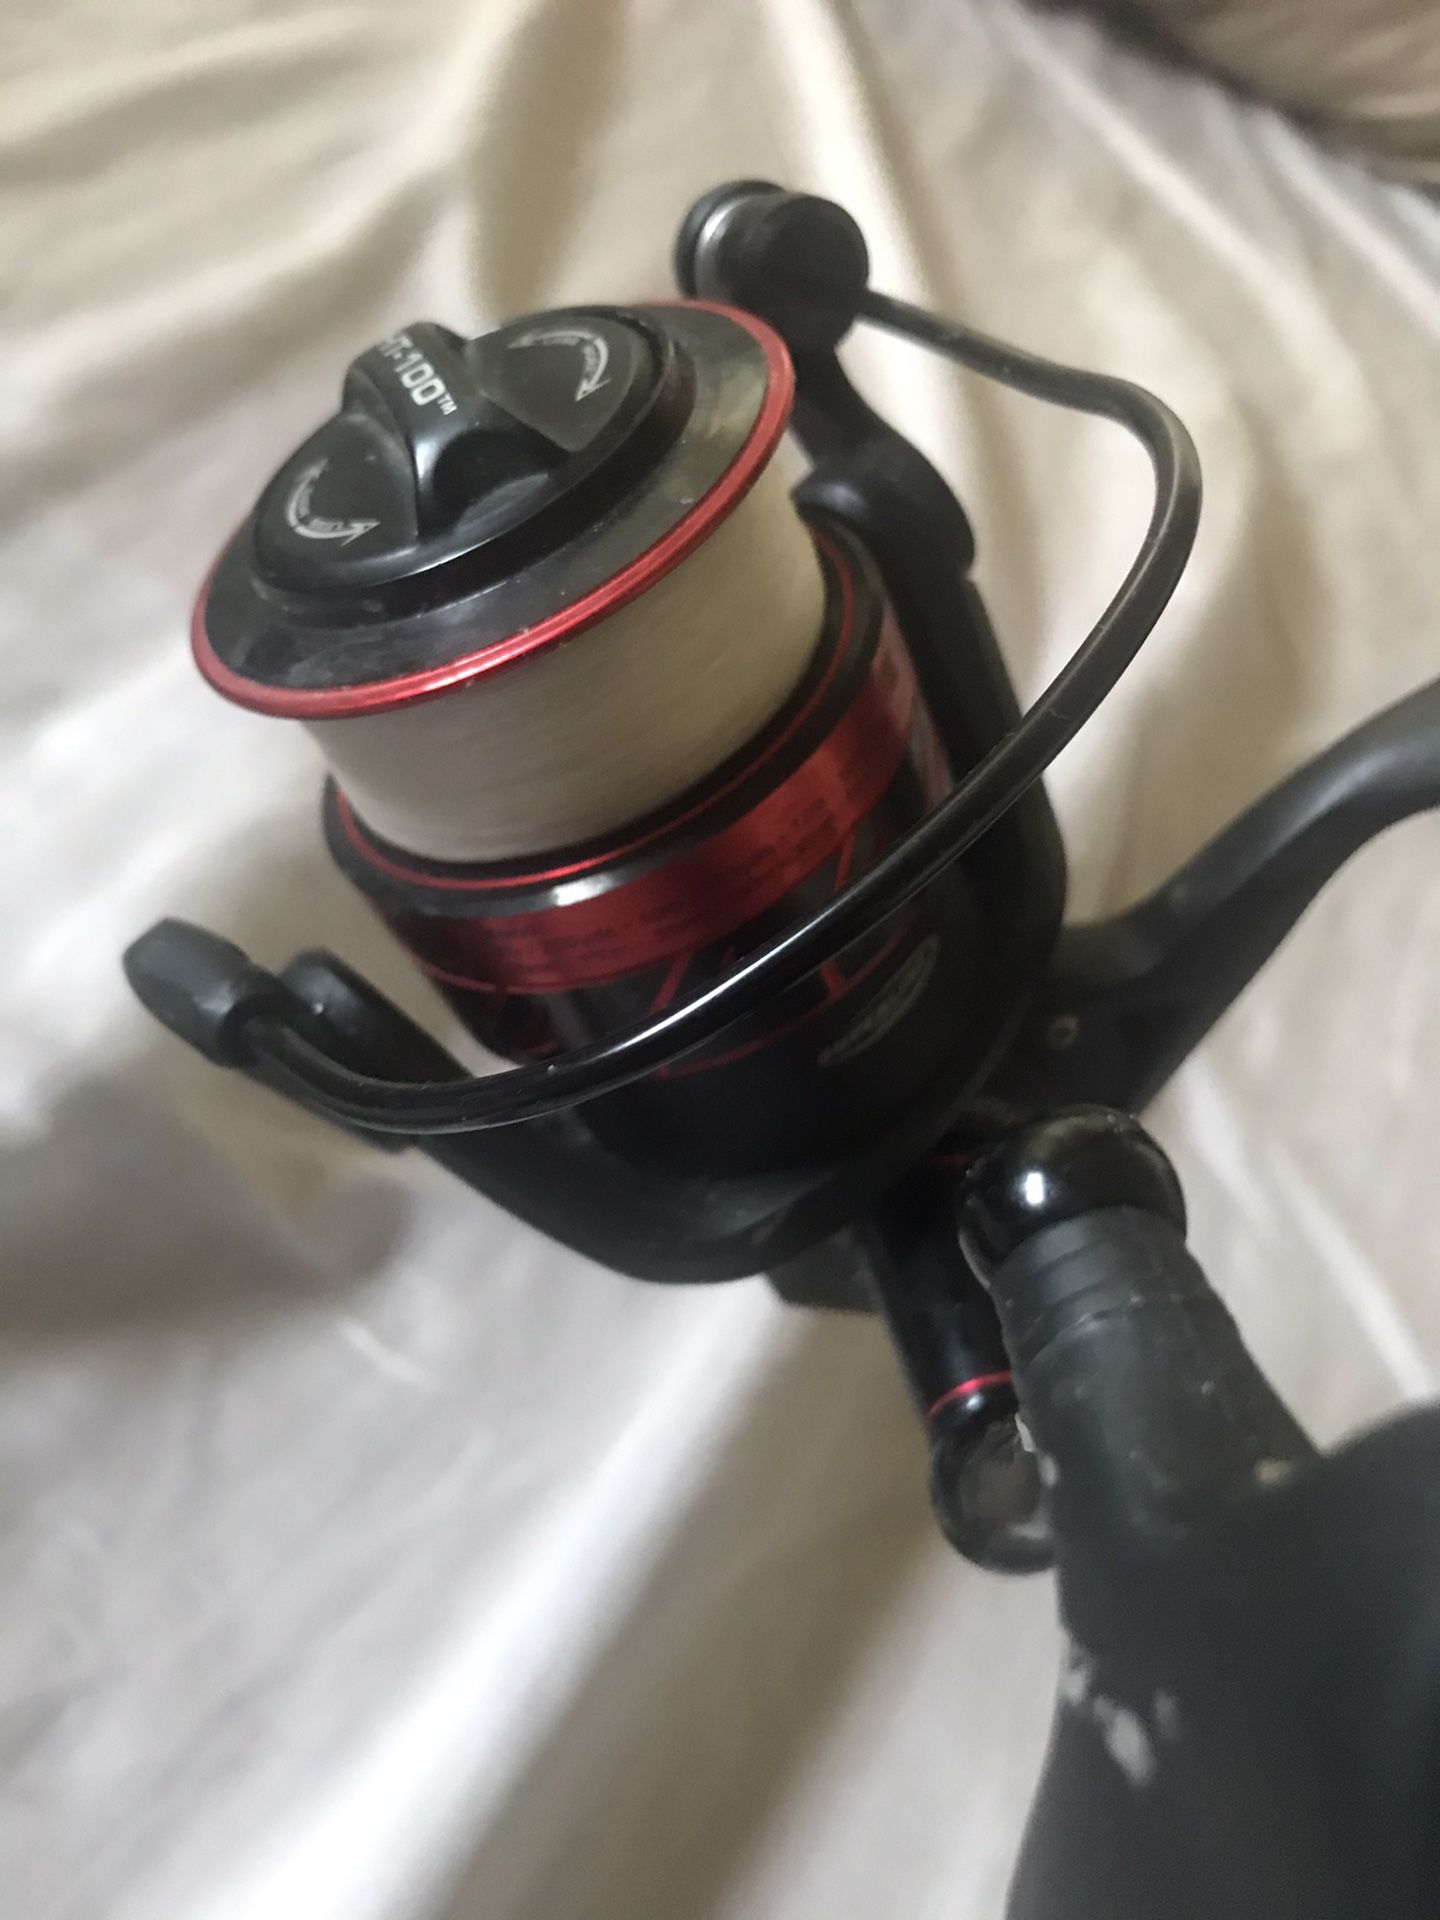 Penn fierce III fishing reel spinning reel laced with 10lb line up